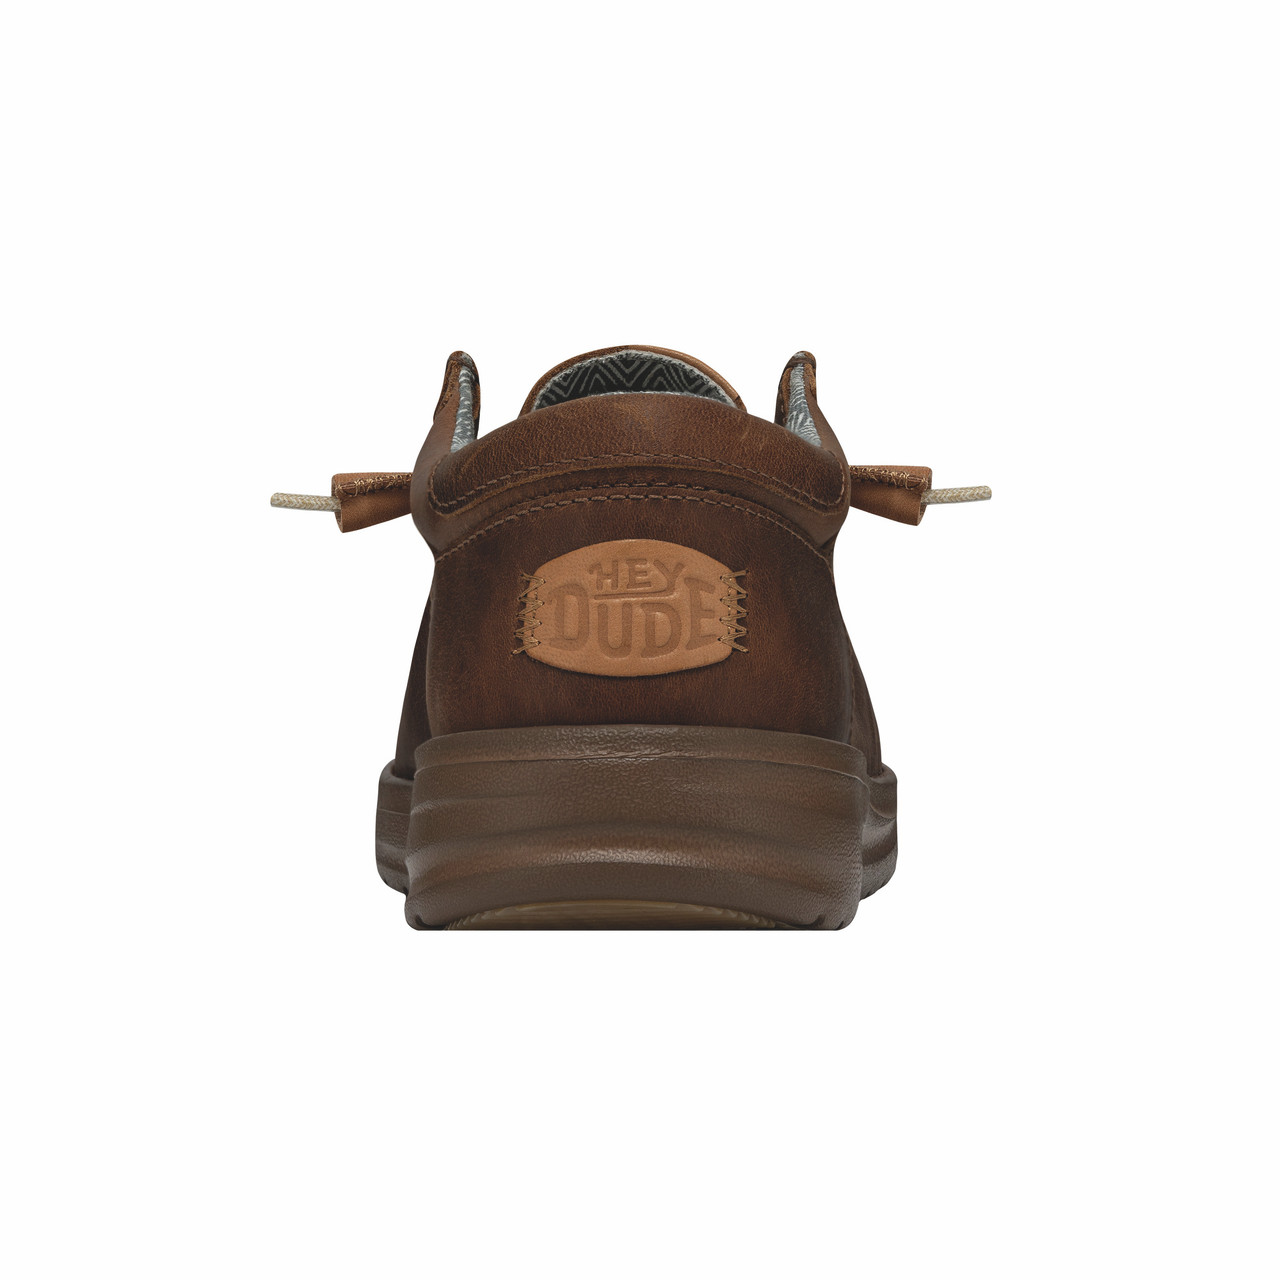 WALLY GRIP CRAFT LEATHER BROWN 40175-255 HEY DUDE